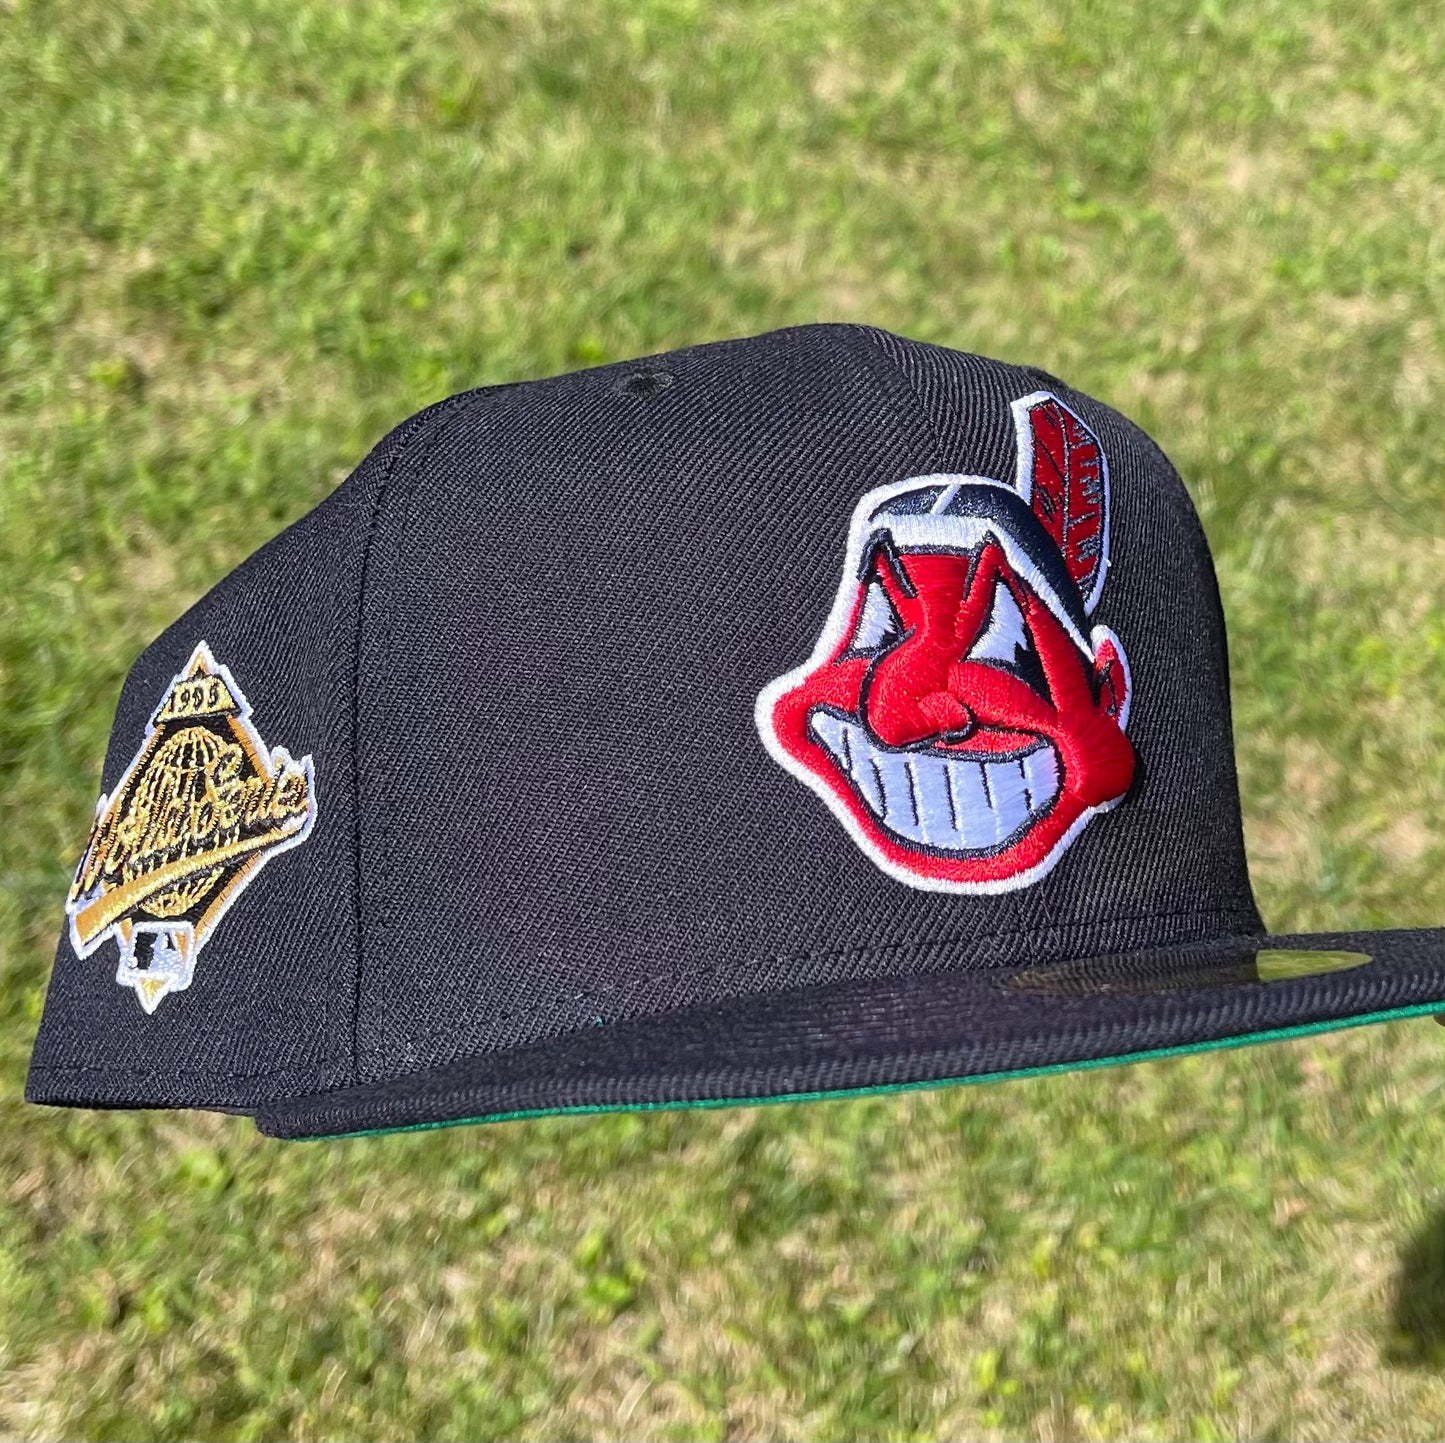 Cleveland Indians Chief Wahoo Banned logo 1995 World Series Fitted (Navy Blue) + Free Pin